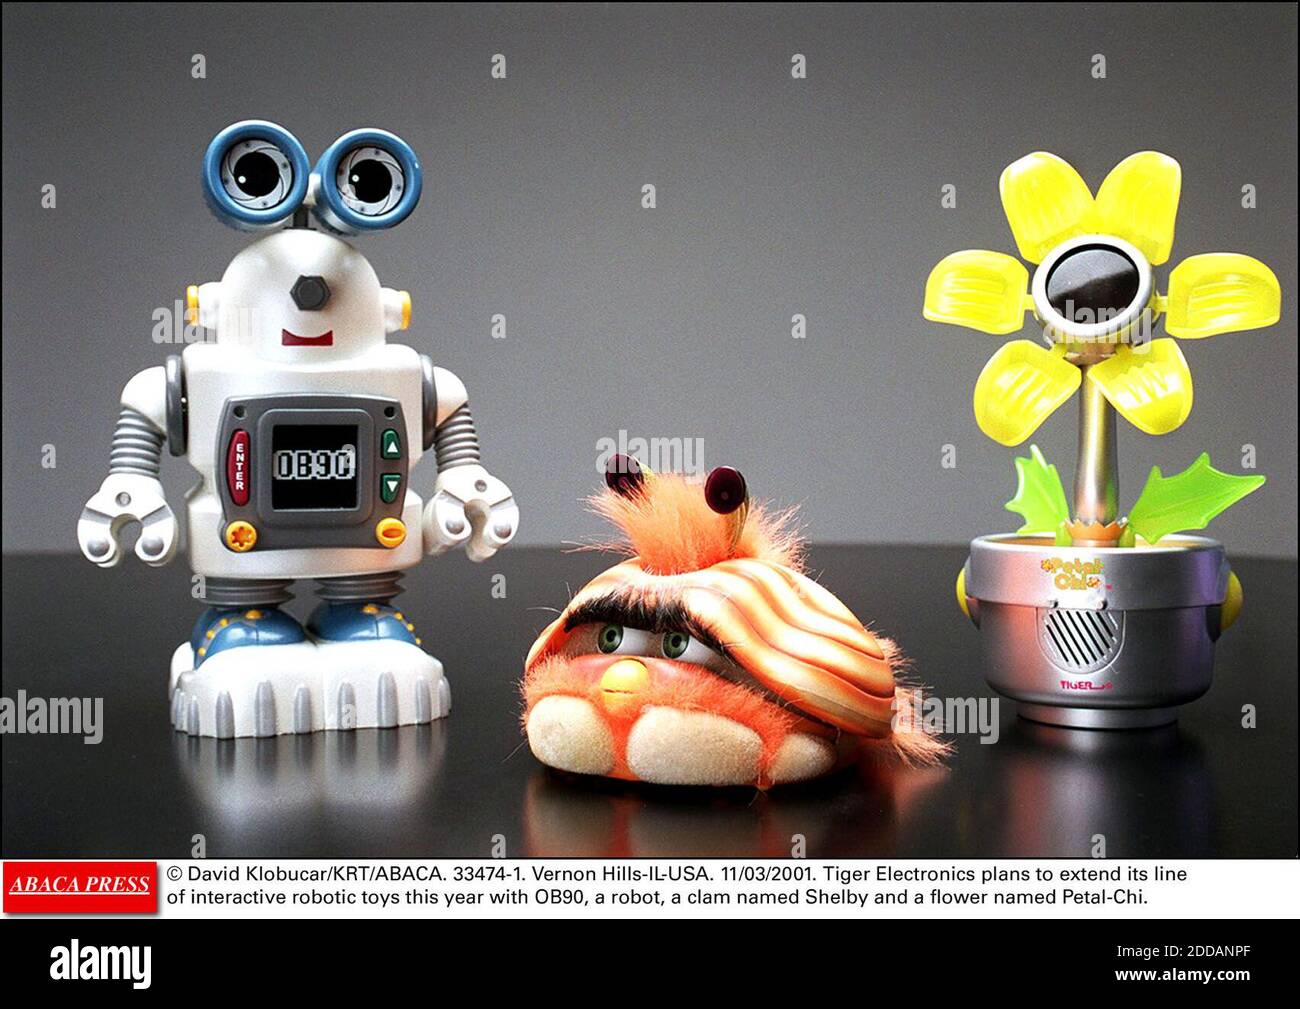 NO FILM, NO VIDEO, NO TV, NO DOCUMENTARY - © David Klobucar/KRT/ABACA.  33474-1. Vernon Hills-IL-USA. 11/03/2001. Tiger Electronics plans to extend  its line of interactive robotic toys this year with OB90, a